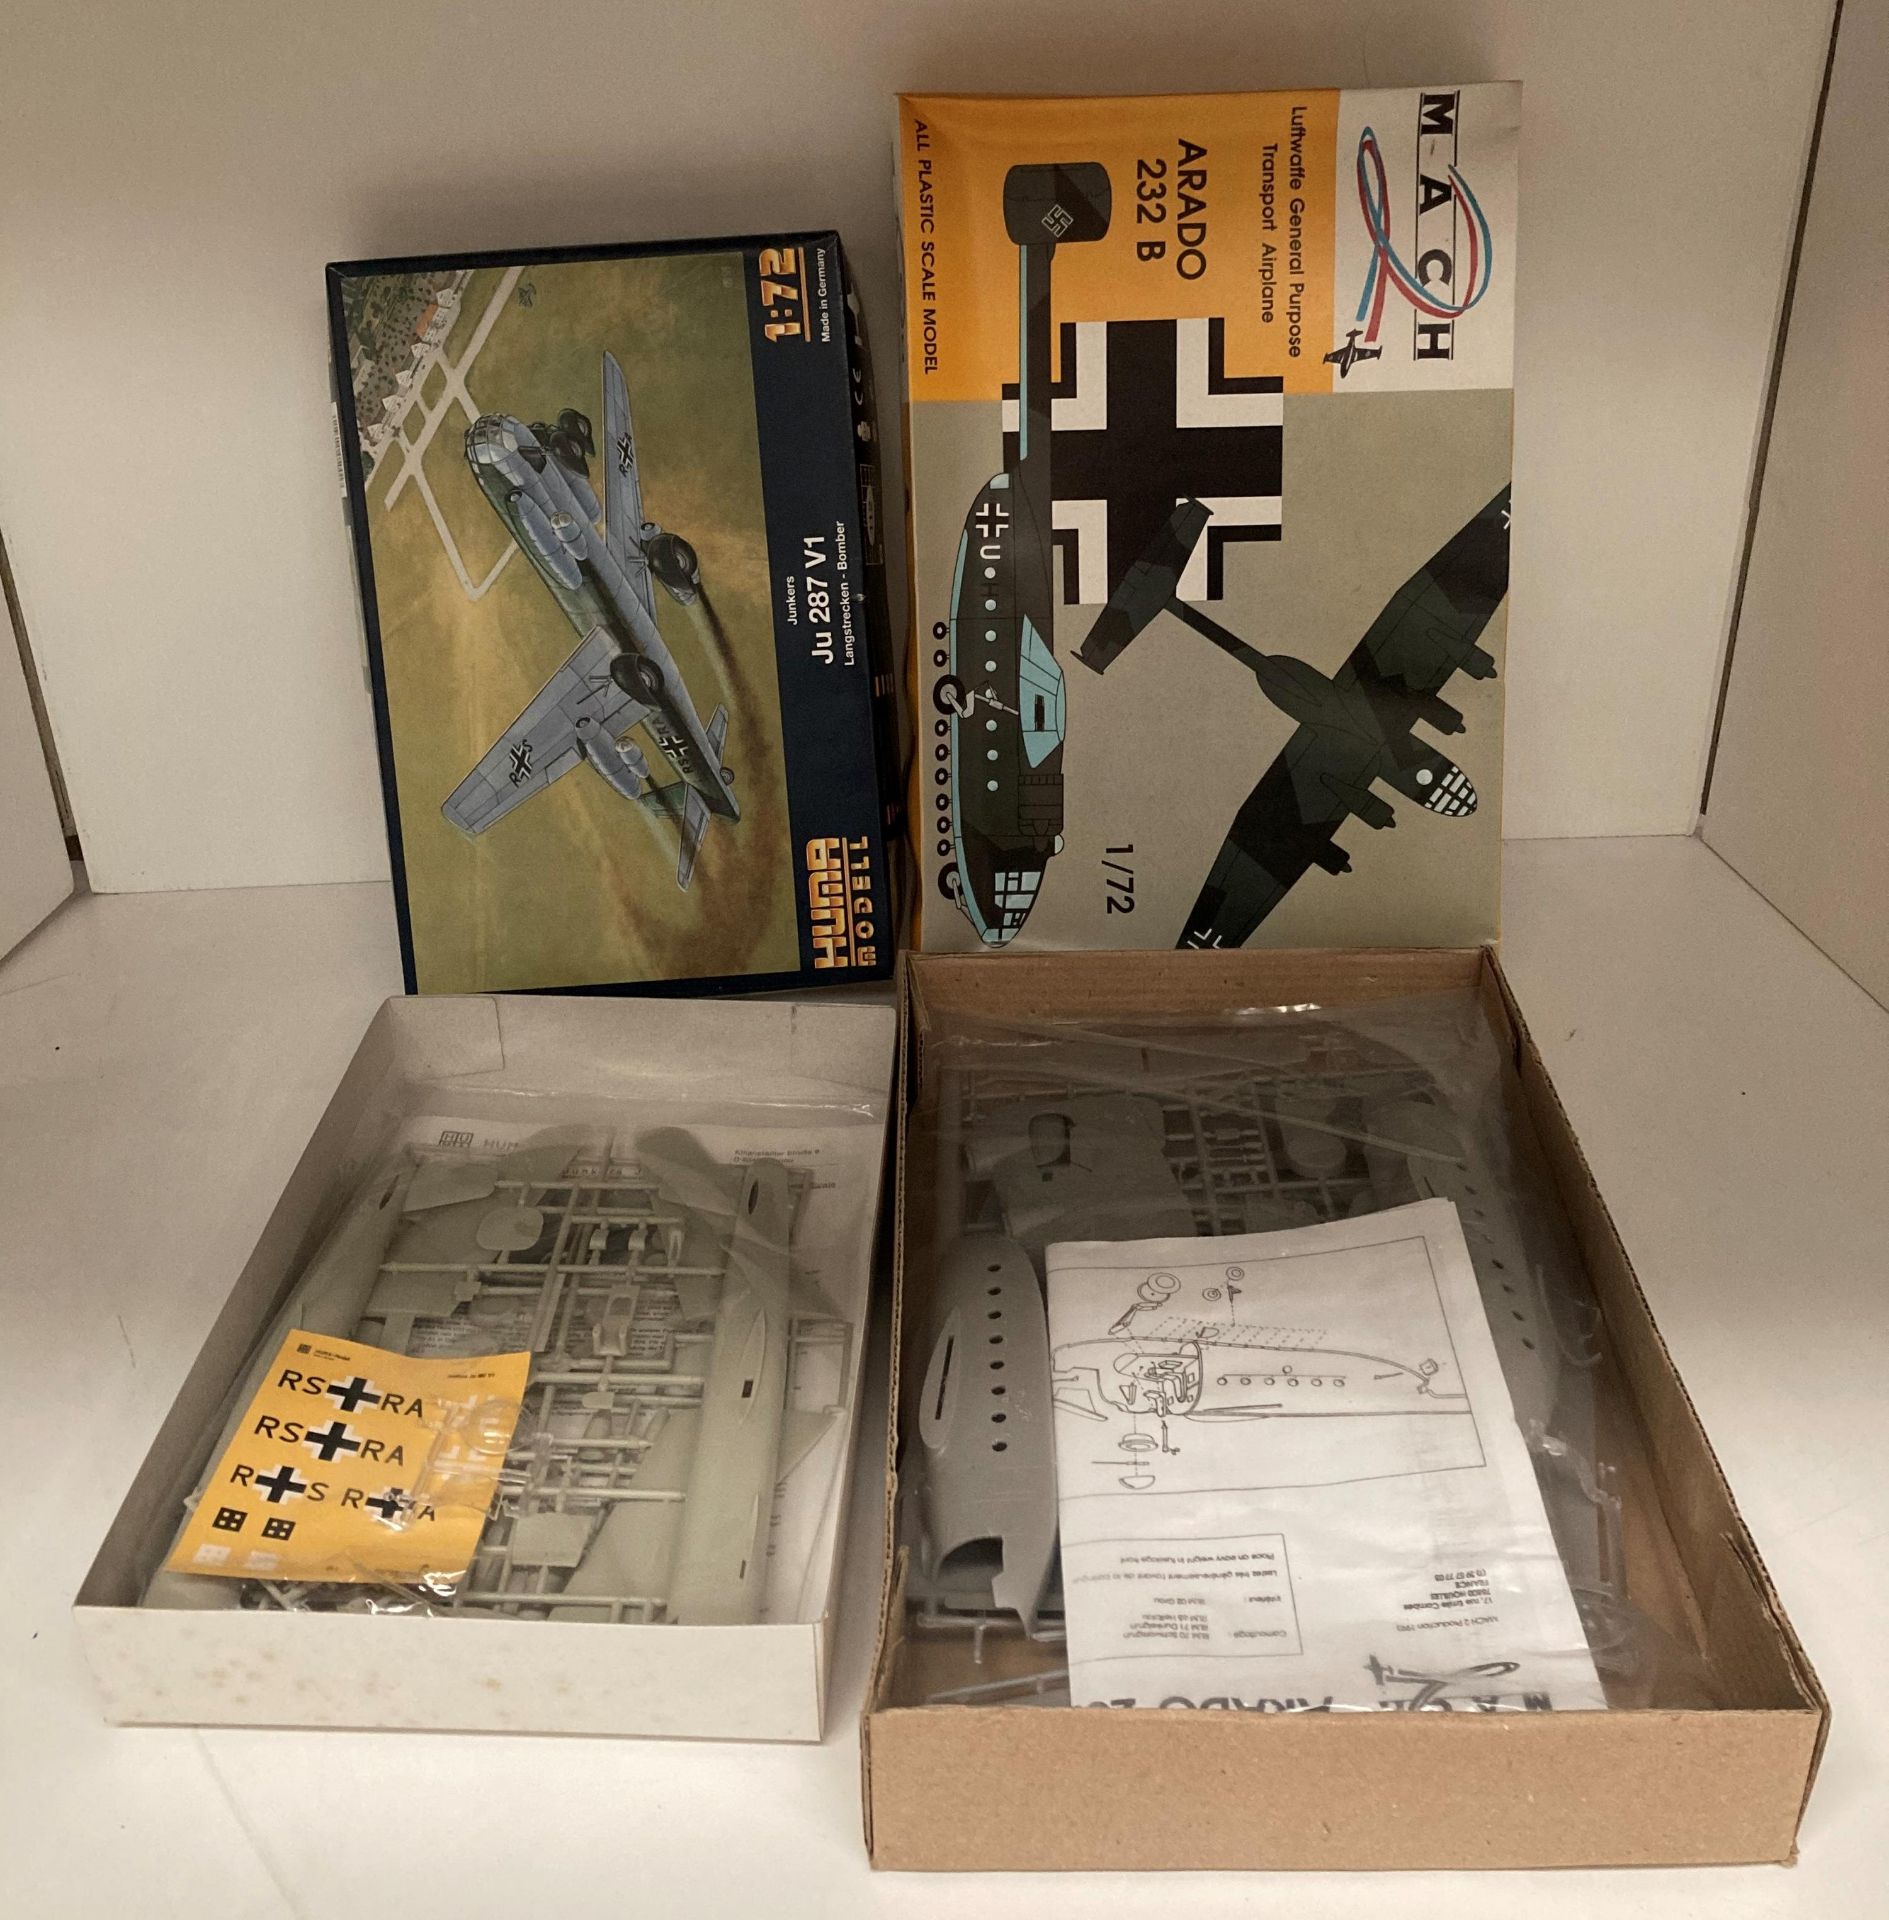 Arado 232 B Luftwaffe general purpose transport airplane 1:72 scale model aircraft by Mach and - Image 2 of 2